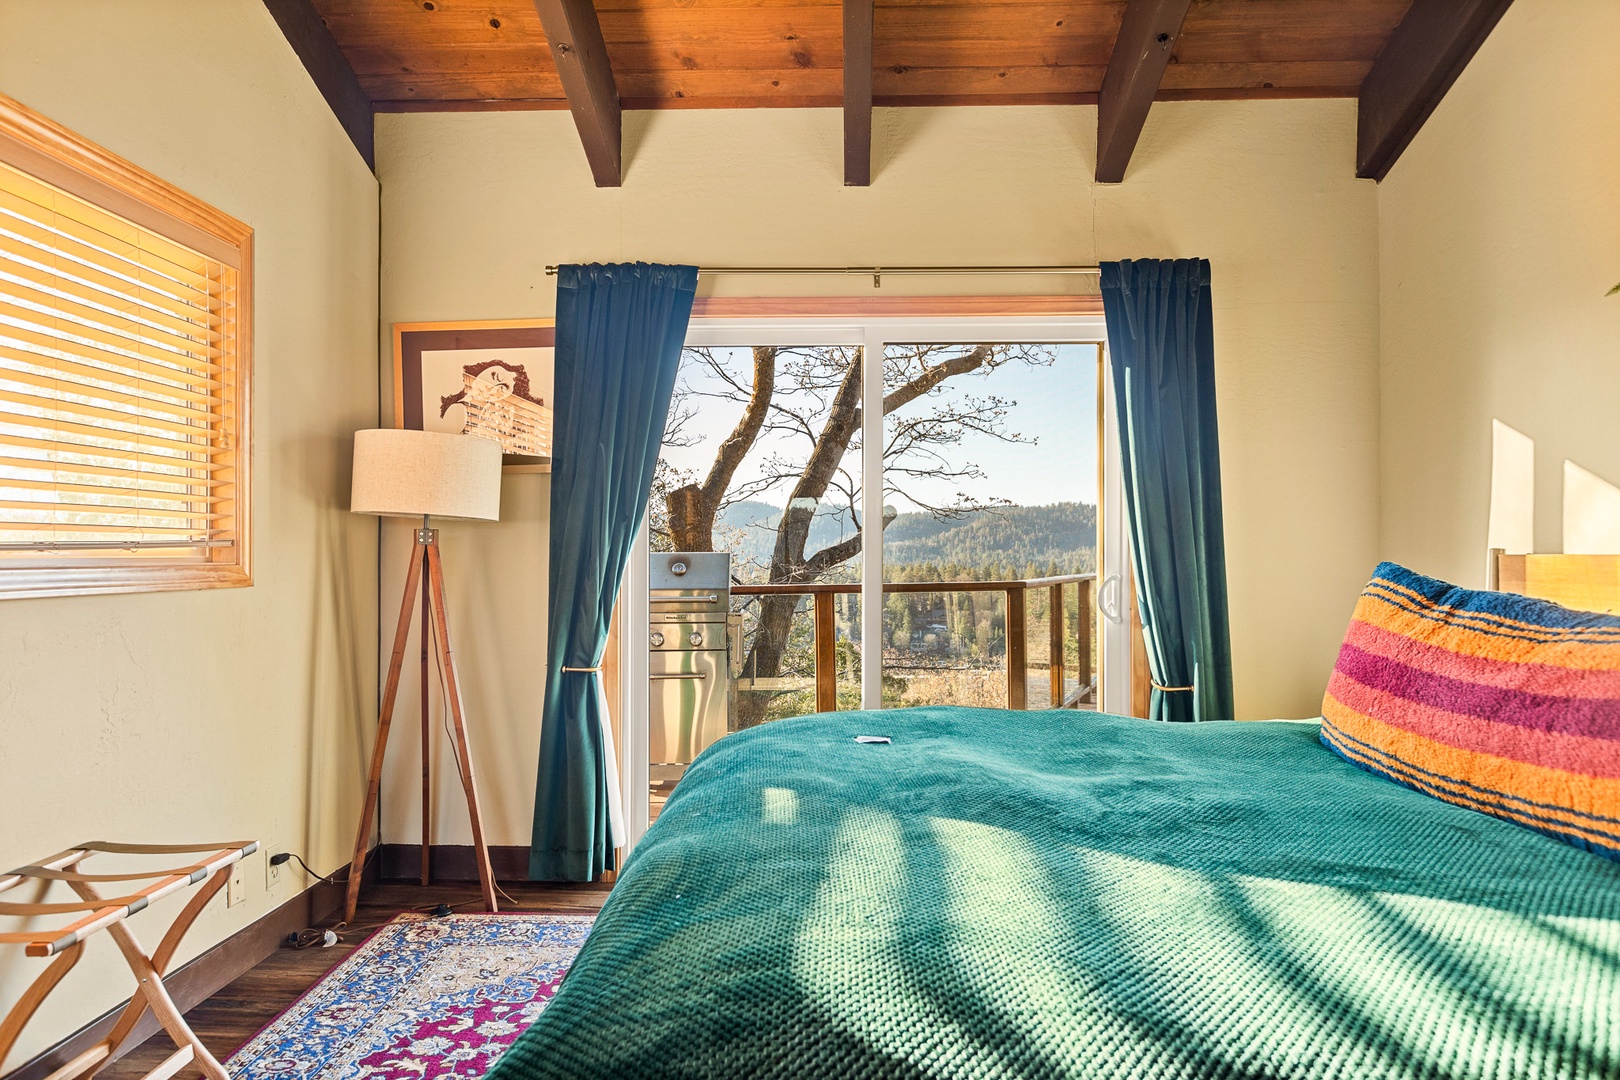 Retreat to this King Bedroom with luxe bedding and splendid views from the back deck